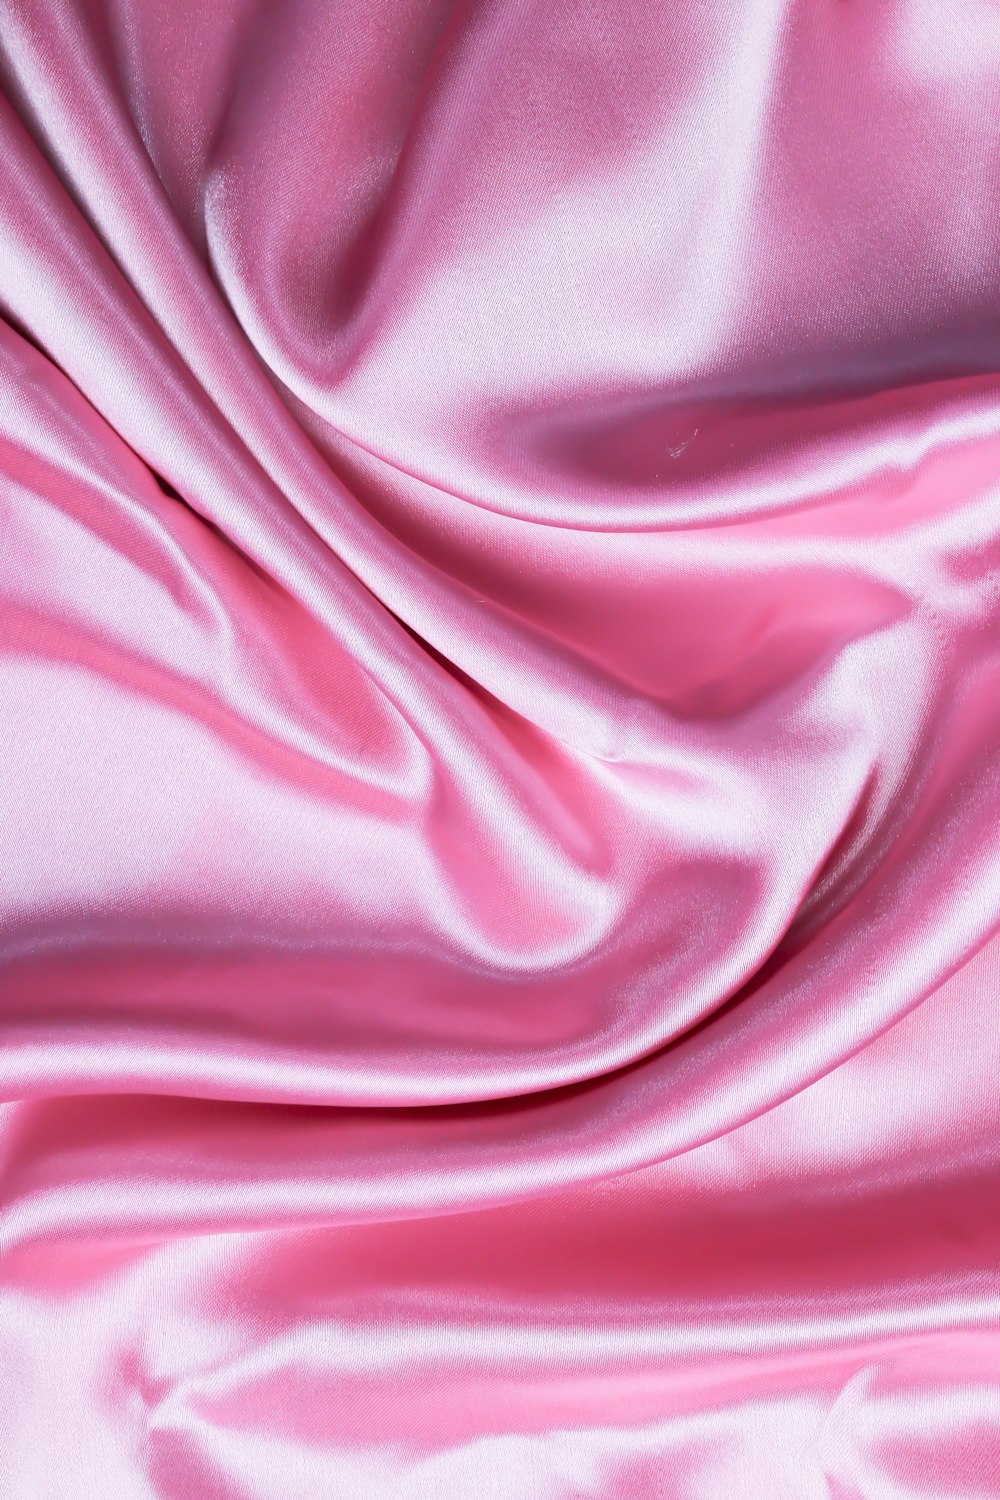 Pink Silk Pictures  Download Free Images on Unsplash